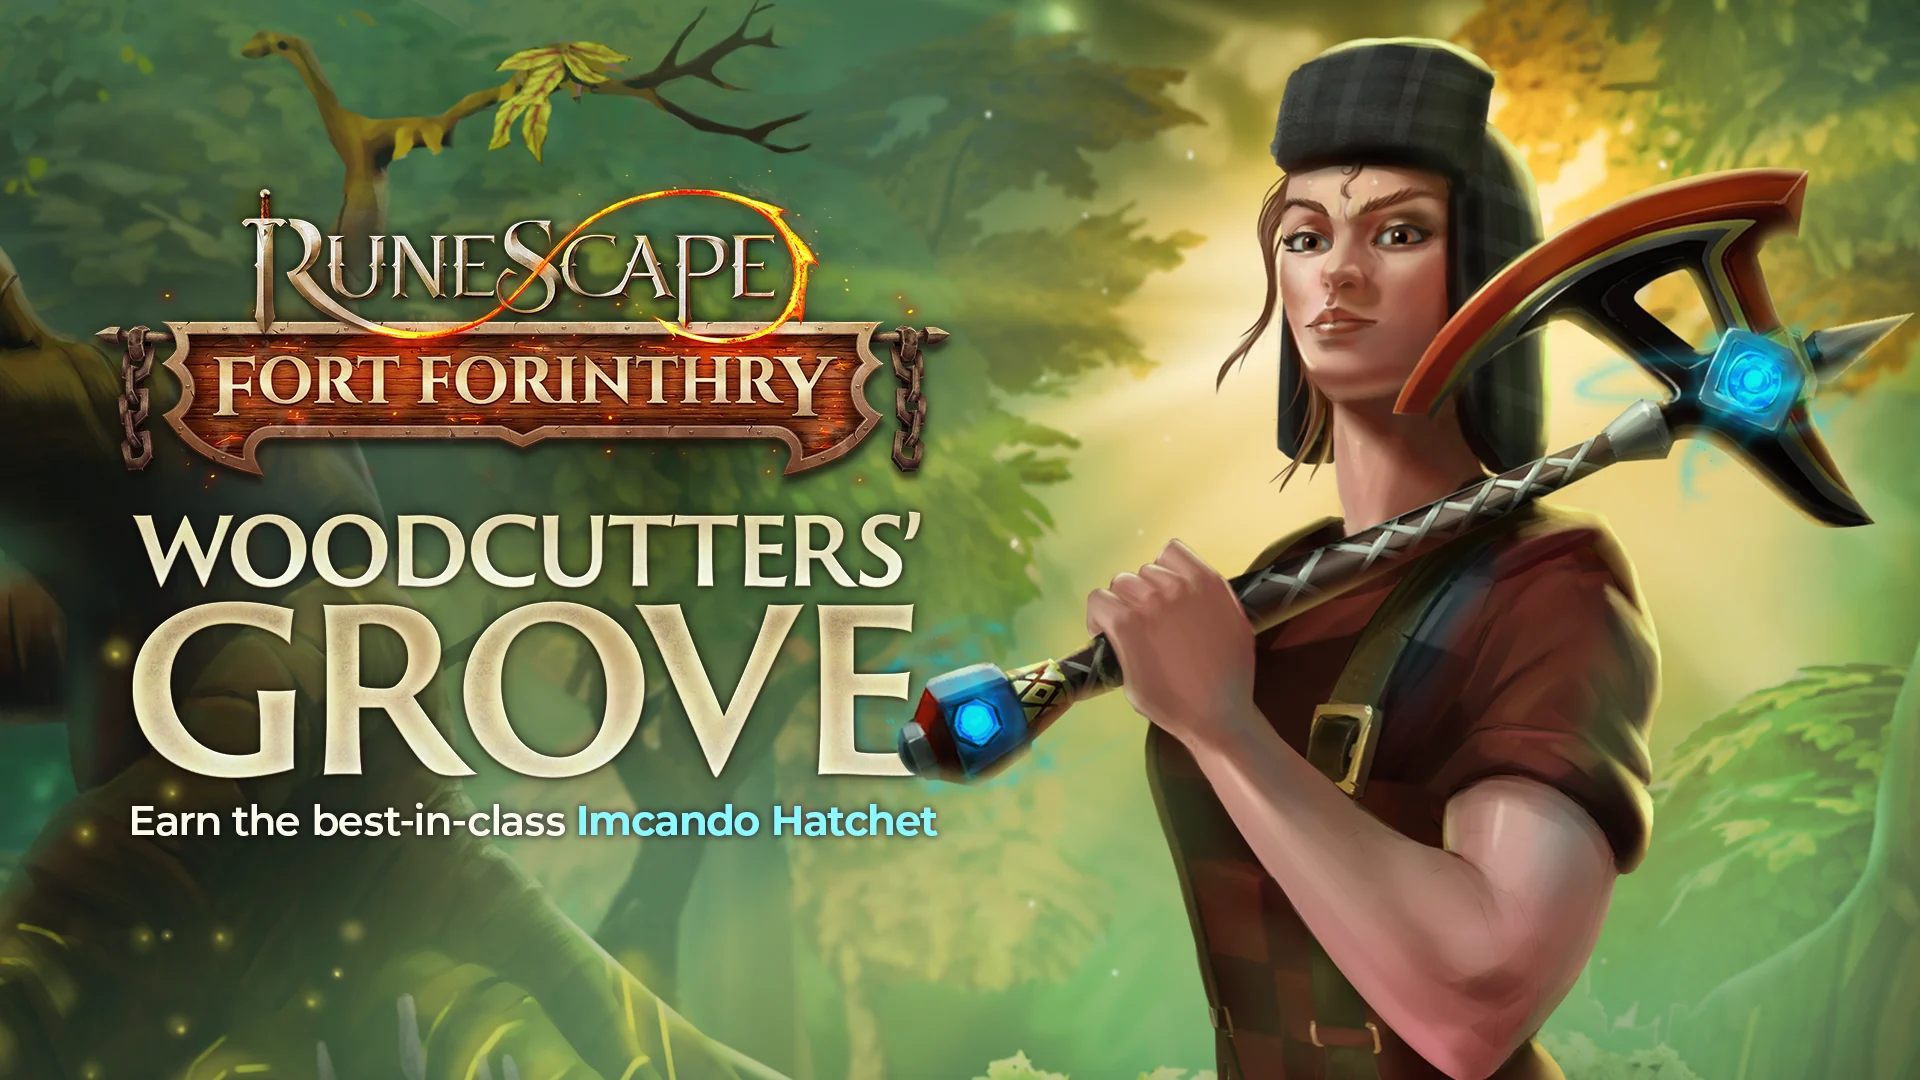 RuneScape Announces Exciting Woodcutting Expansion With 'Woodcutters' Grove - Fort Forinthry Season Update' 6